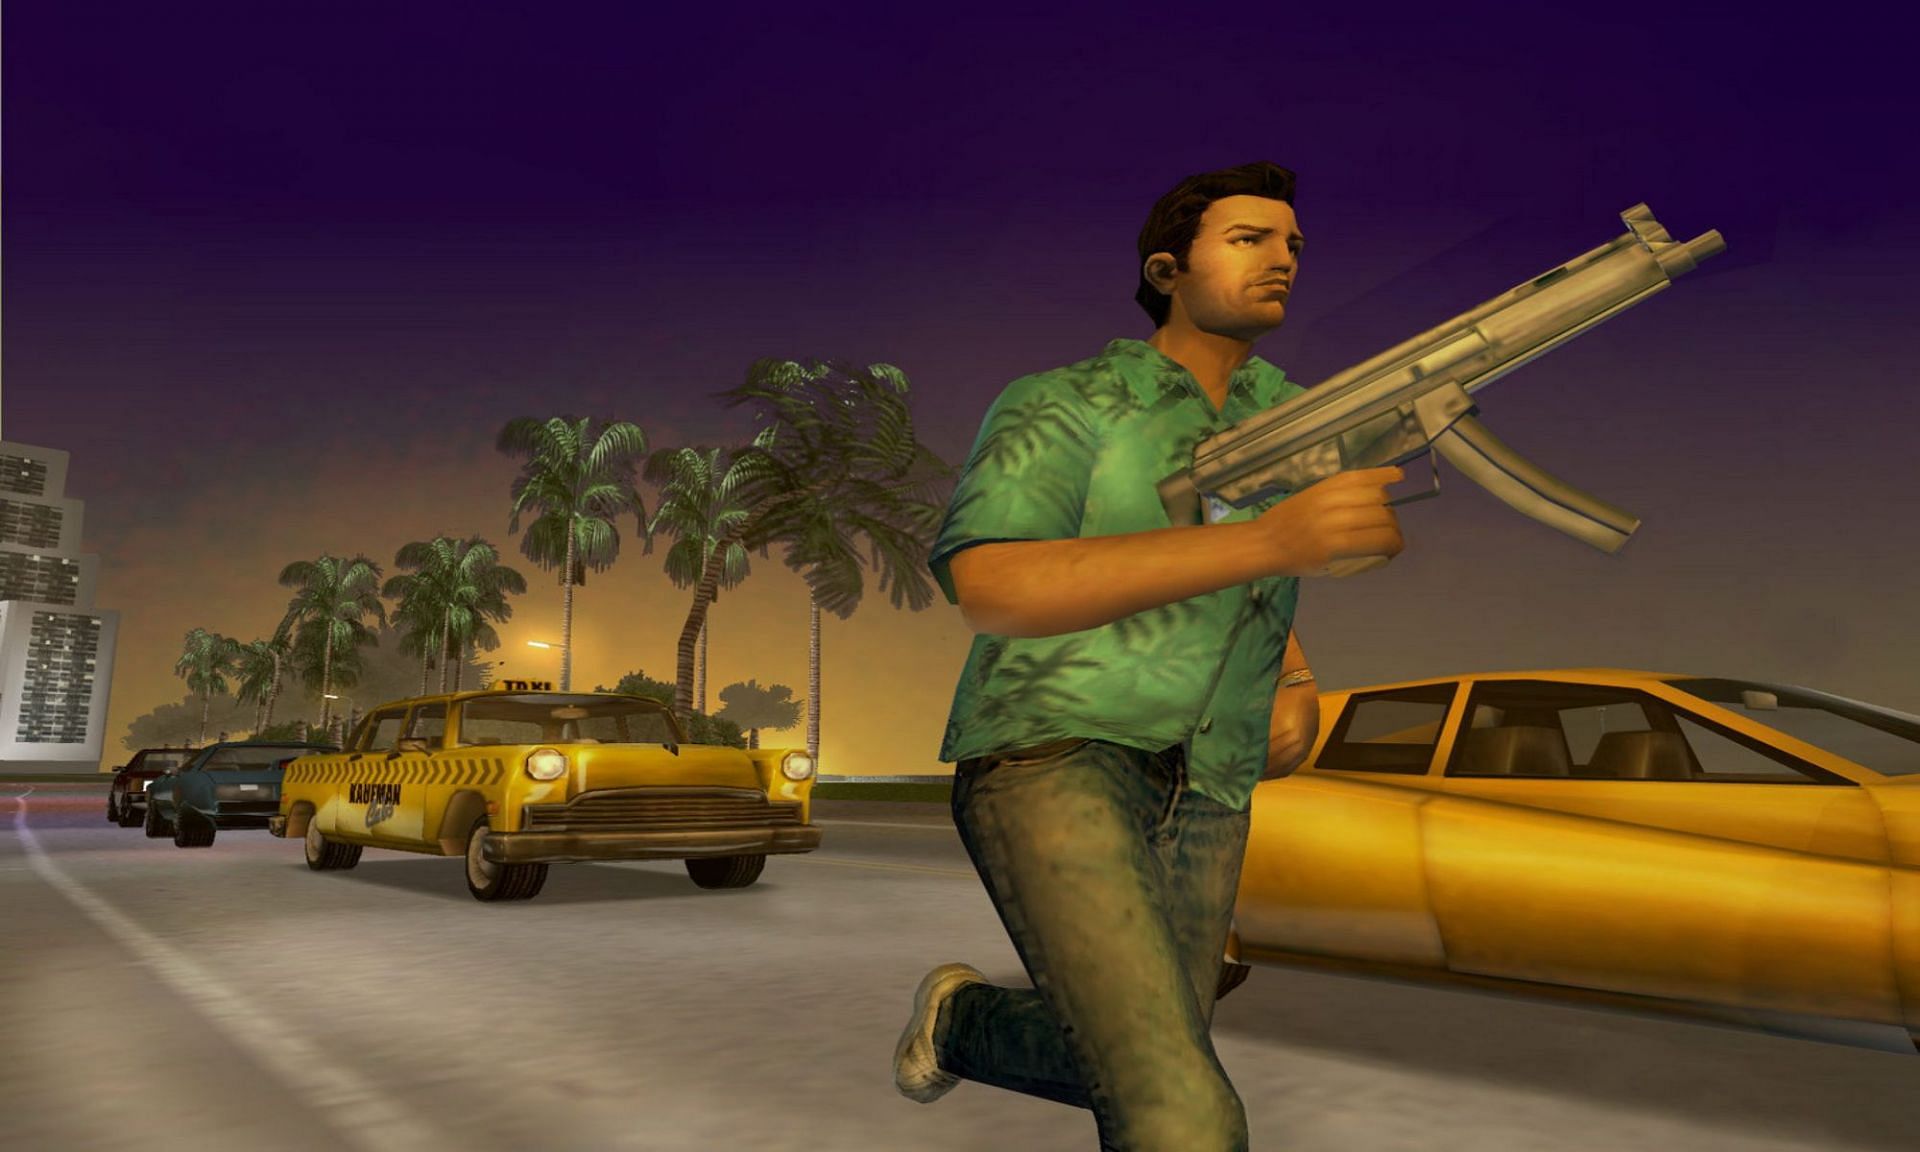 Another busy night for Tommy Vercetti